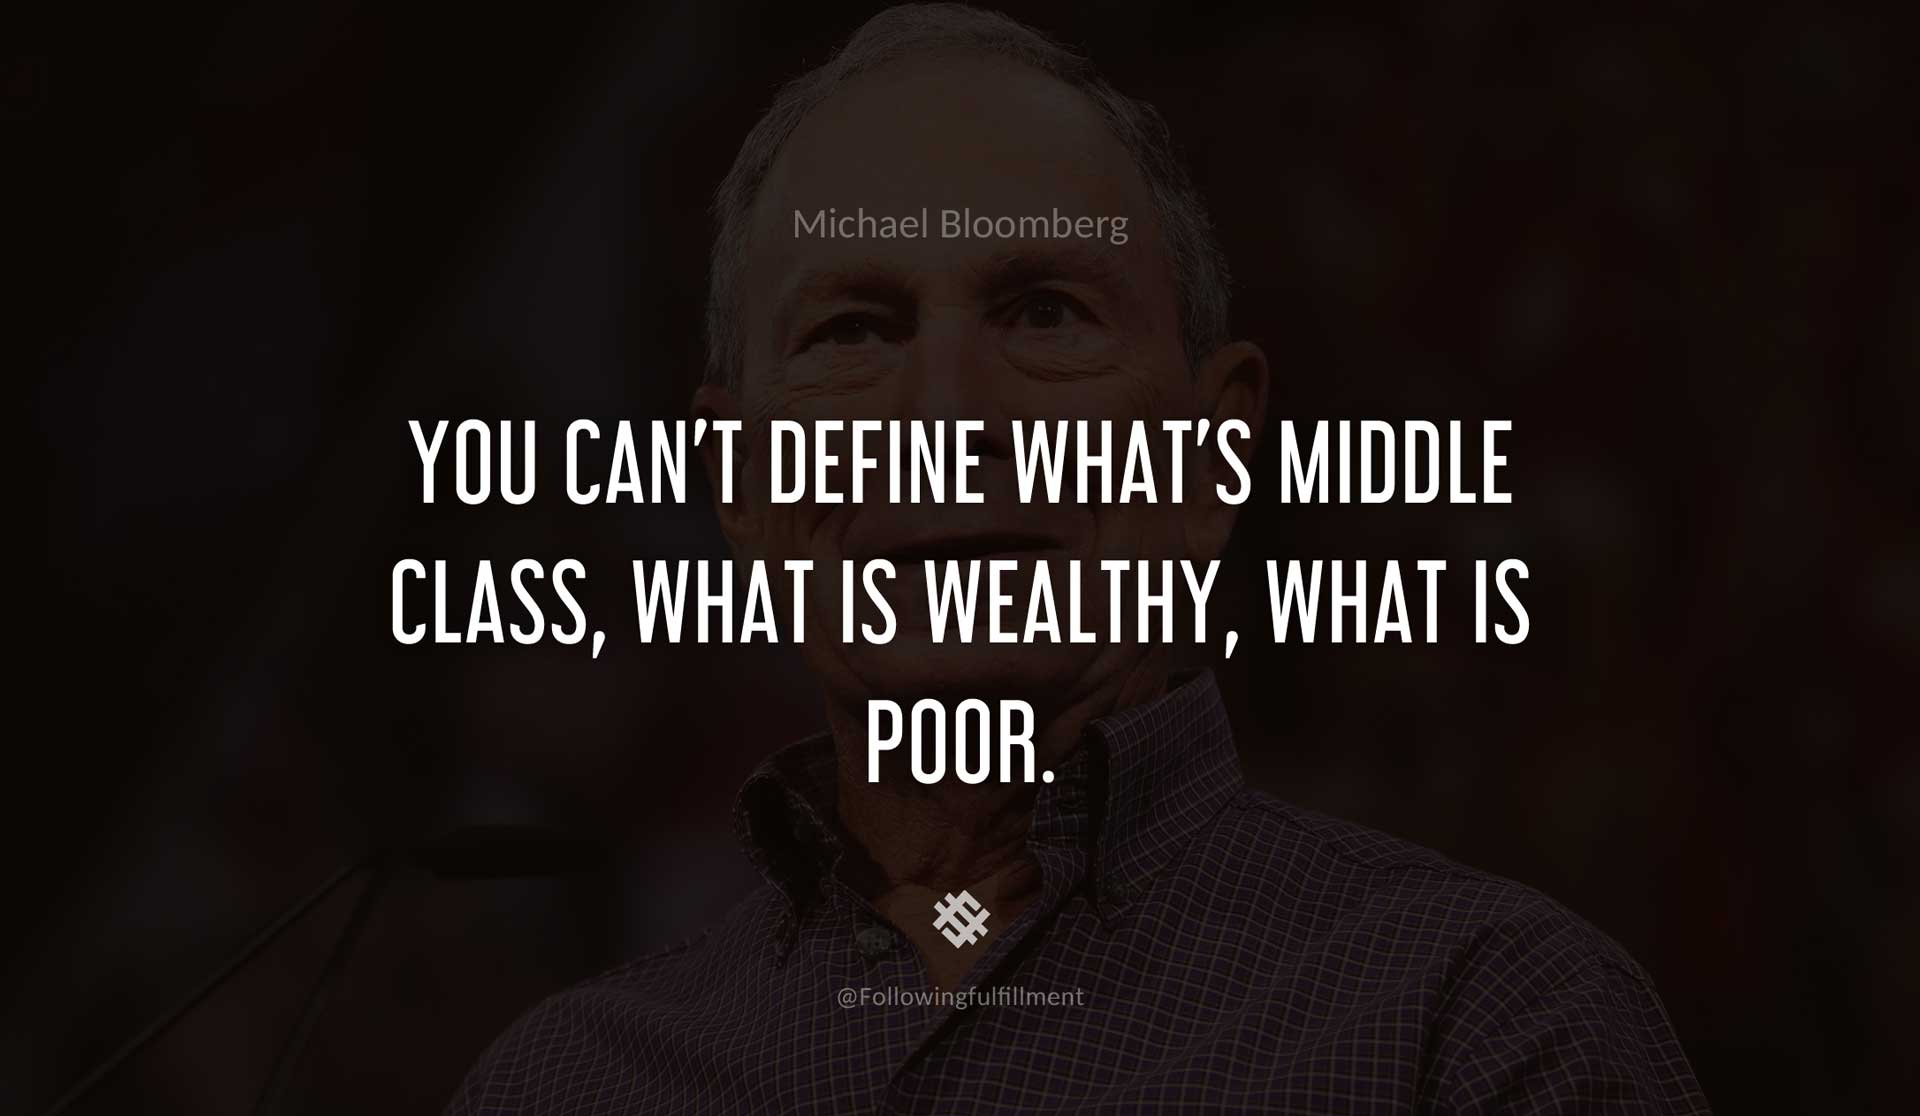 You-can't-define-what's-middle-class,-what-is-wealthy,-what-is-poor.-MICHAEL-BLOOMBERG-Quote.jpg